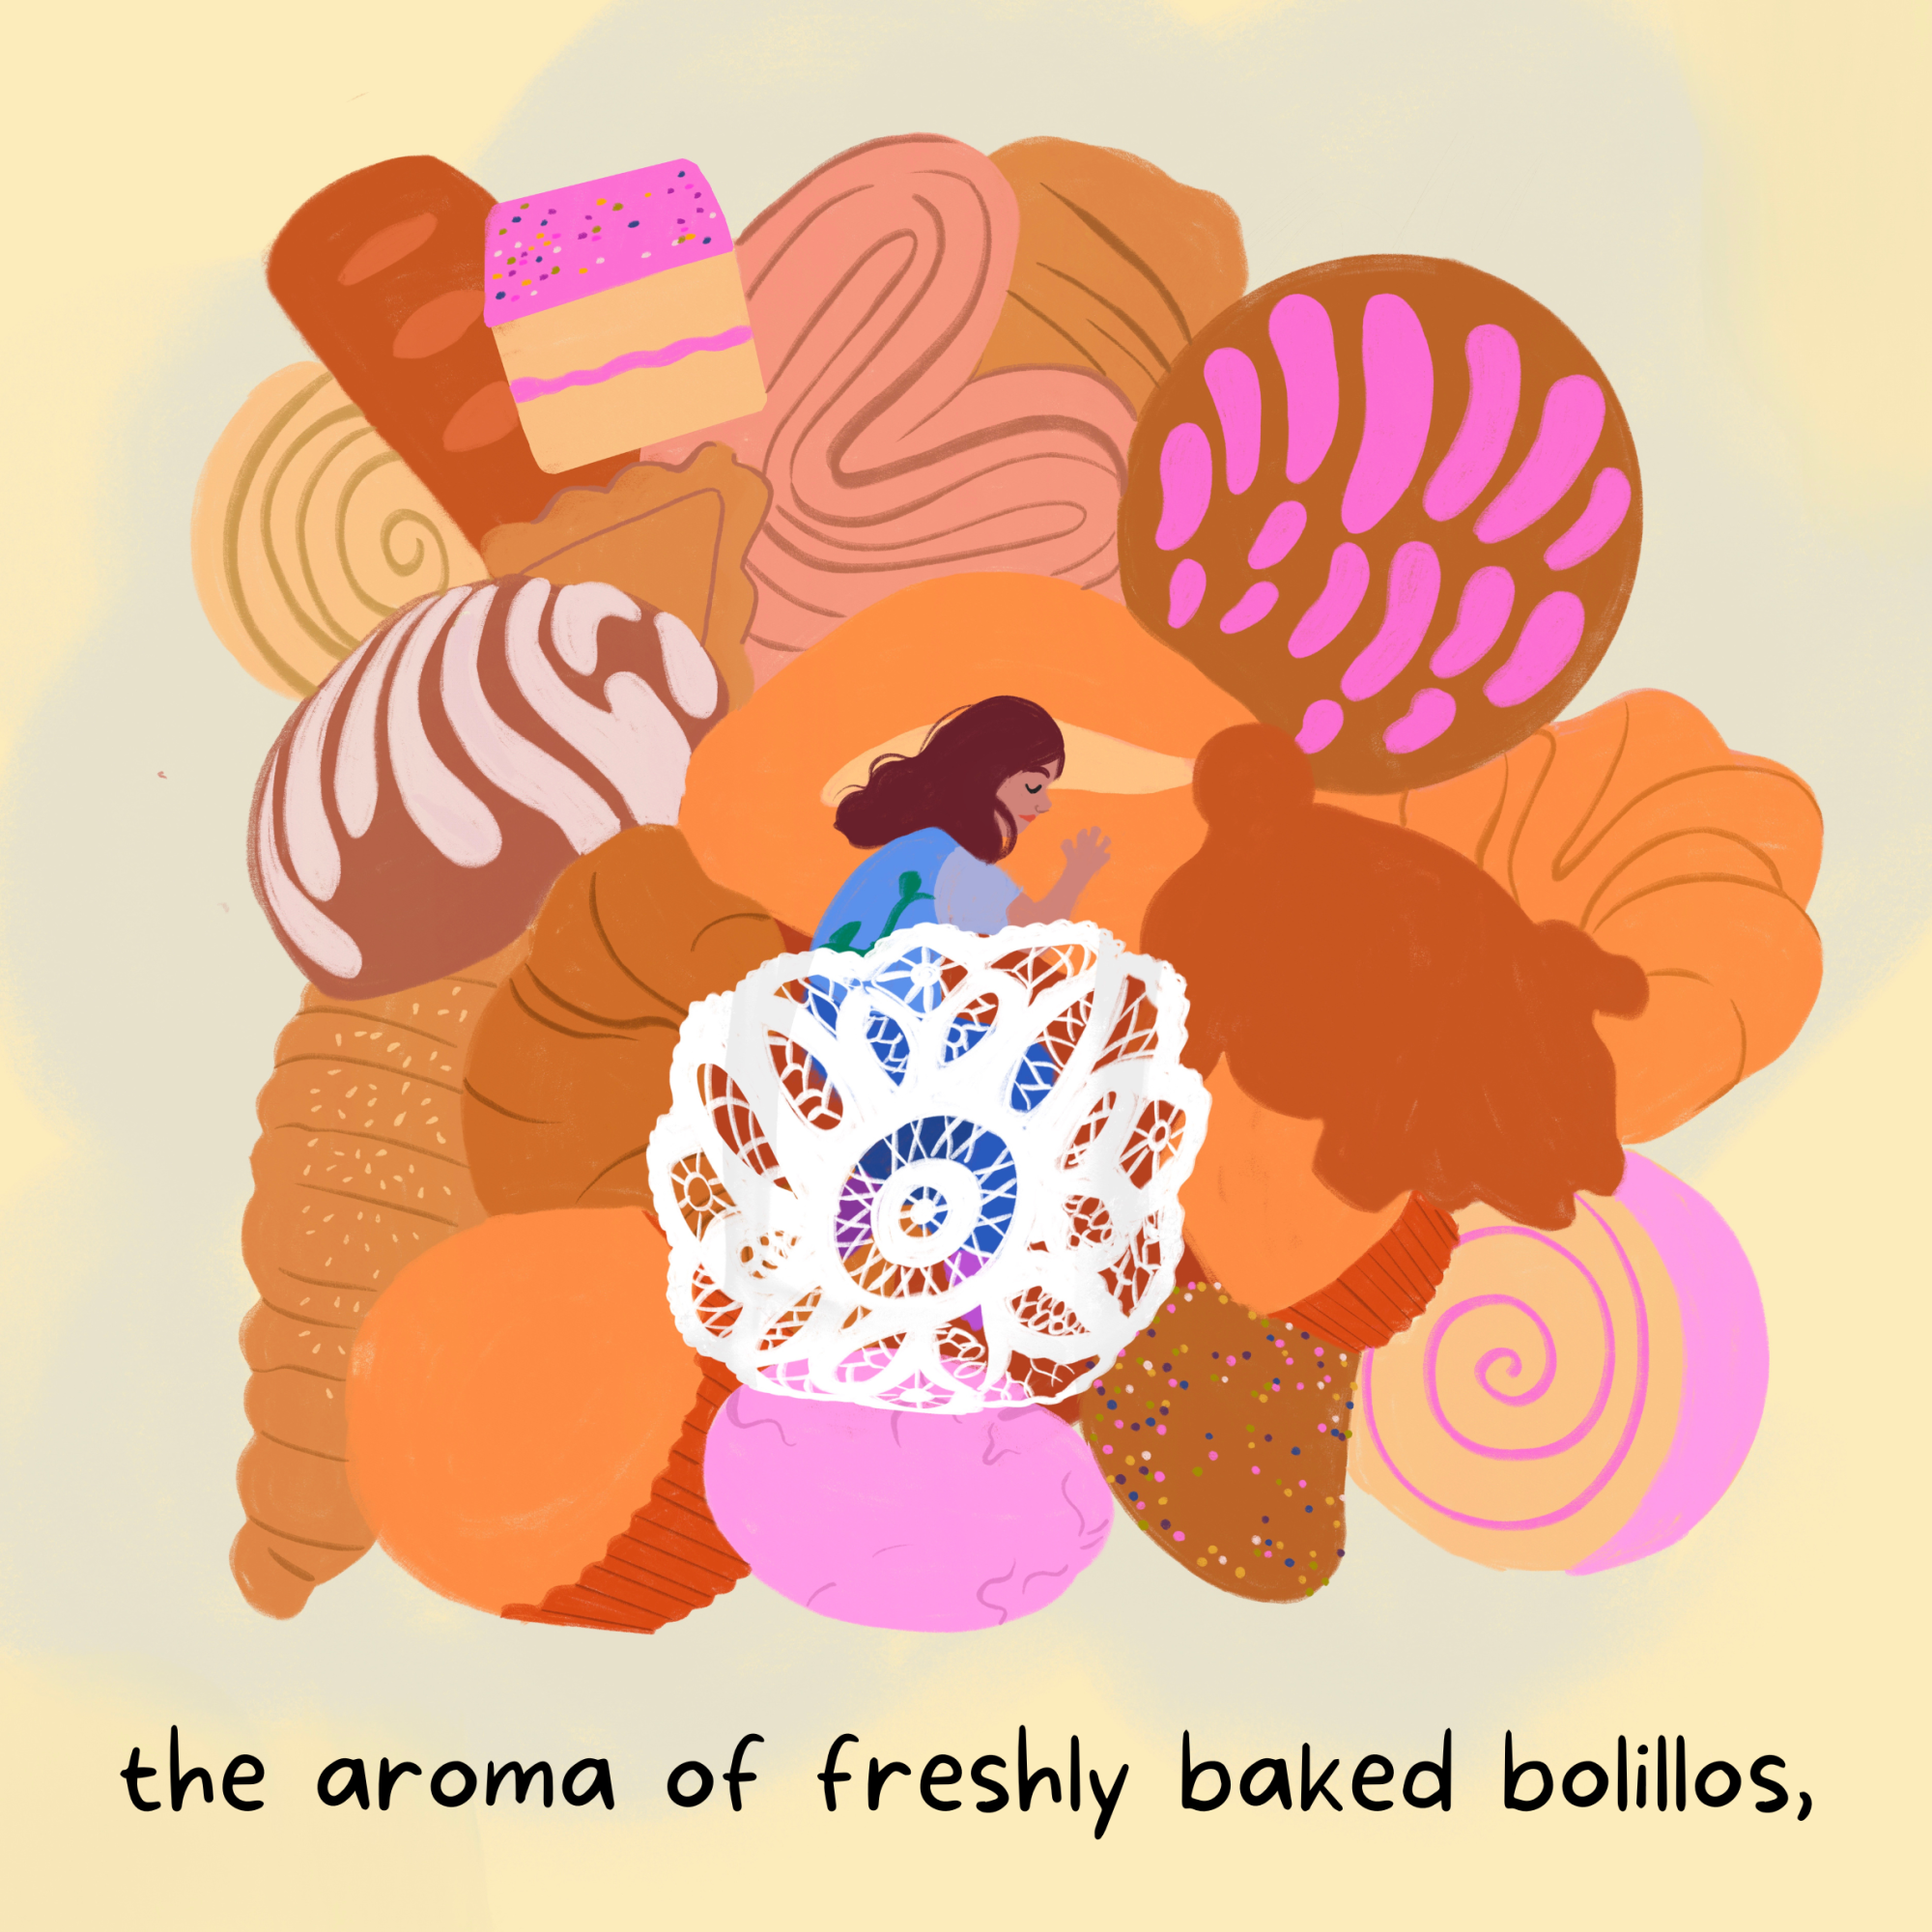 An illustration of a person among baked goods: the aroma of freshly baked bolillos,